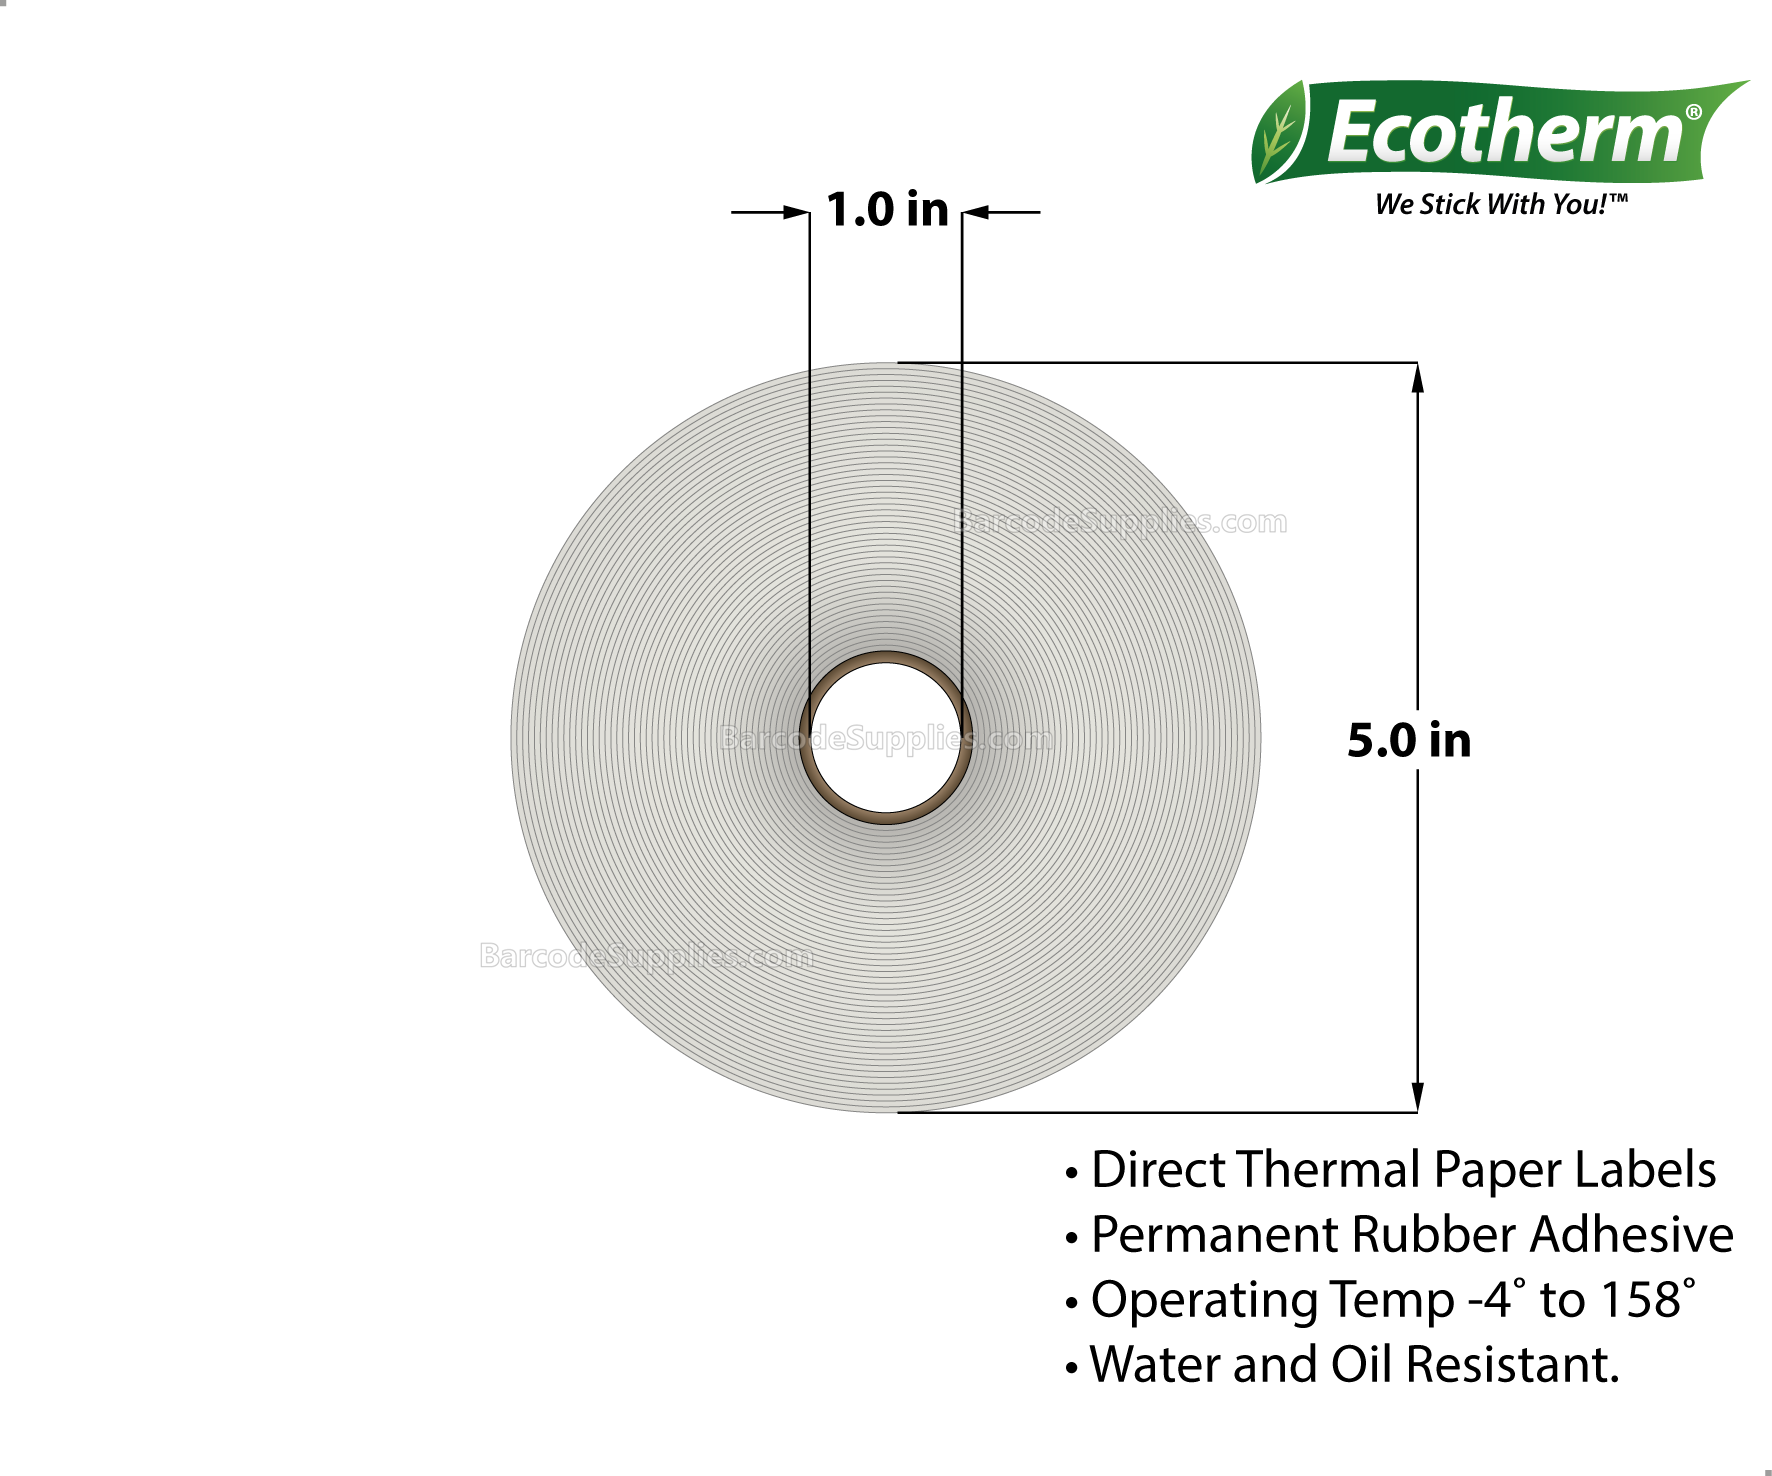 2.25 x 0.5 Direct Thermal White Labels With Rubber Adhesive - Perforated - 4200 Labels Per Roll - Carton Of 6 Rolls - 25200 Labels Total - MPN: ECOTHERM15124-6